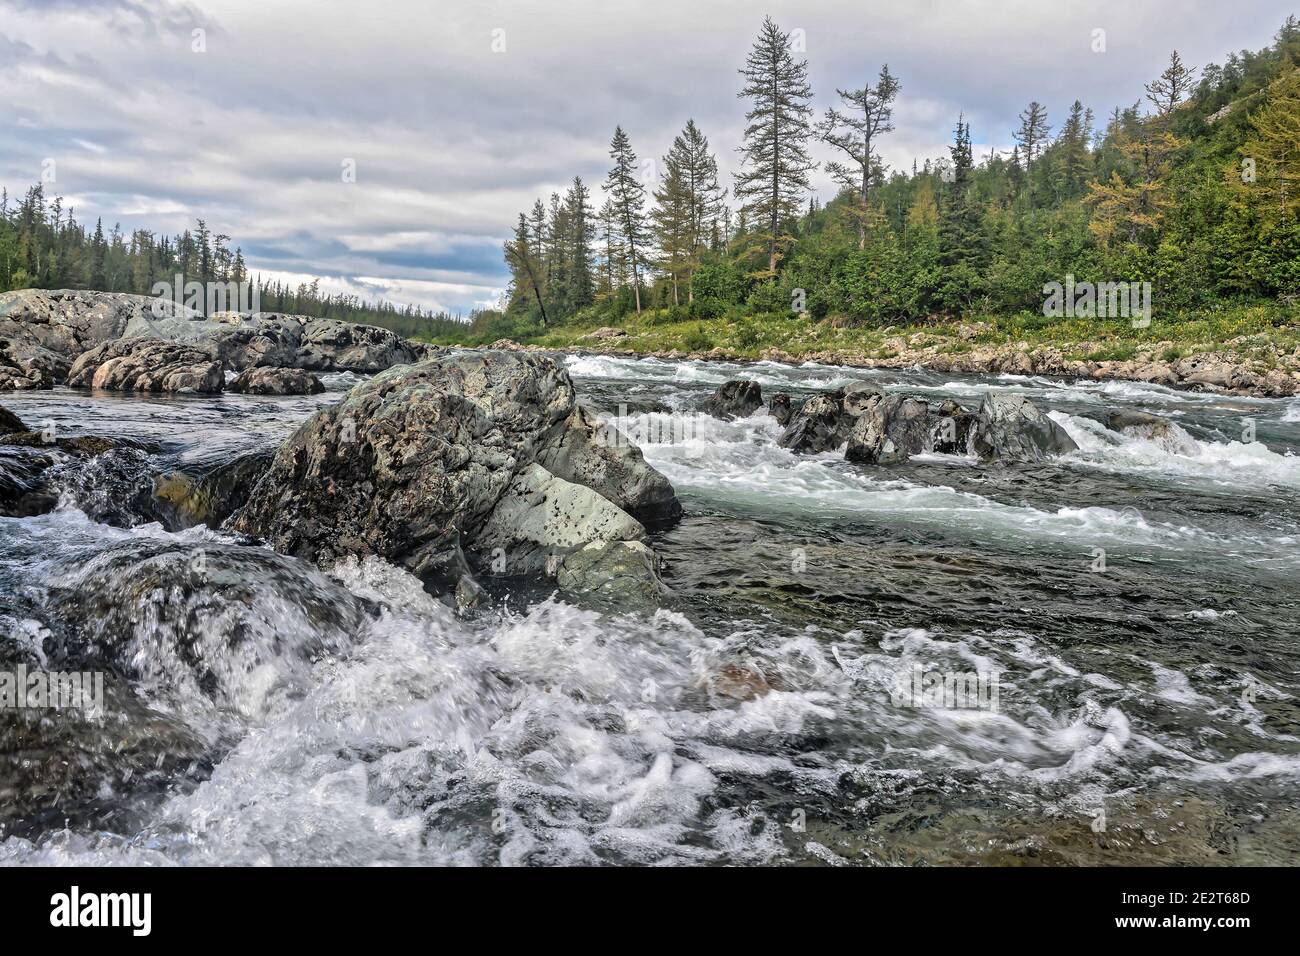 A rapid on the north river. Landscape with white water on a rapid. Stock Photo